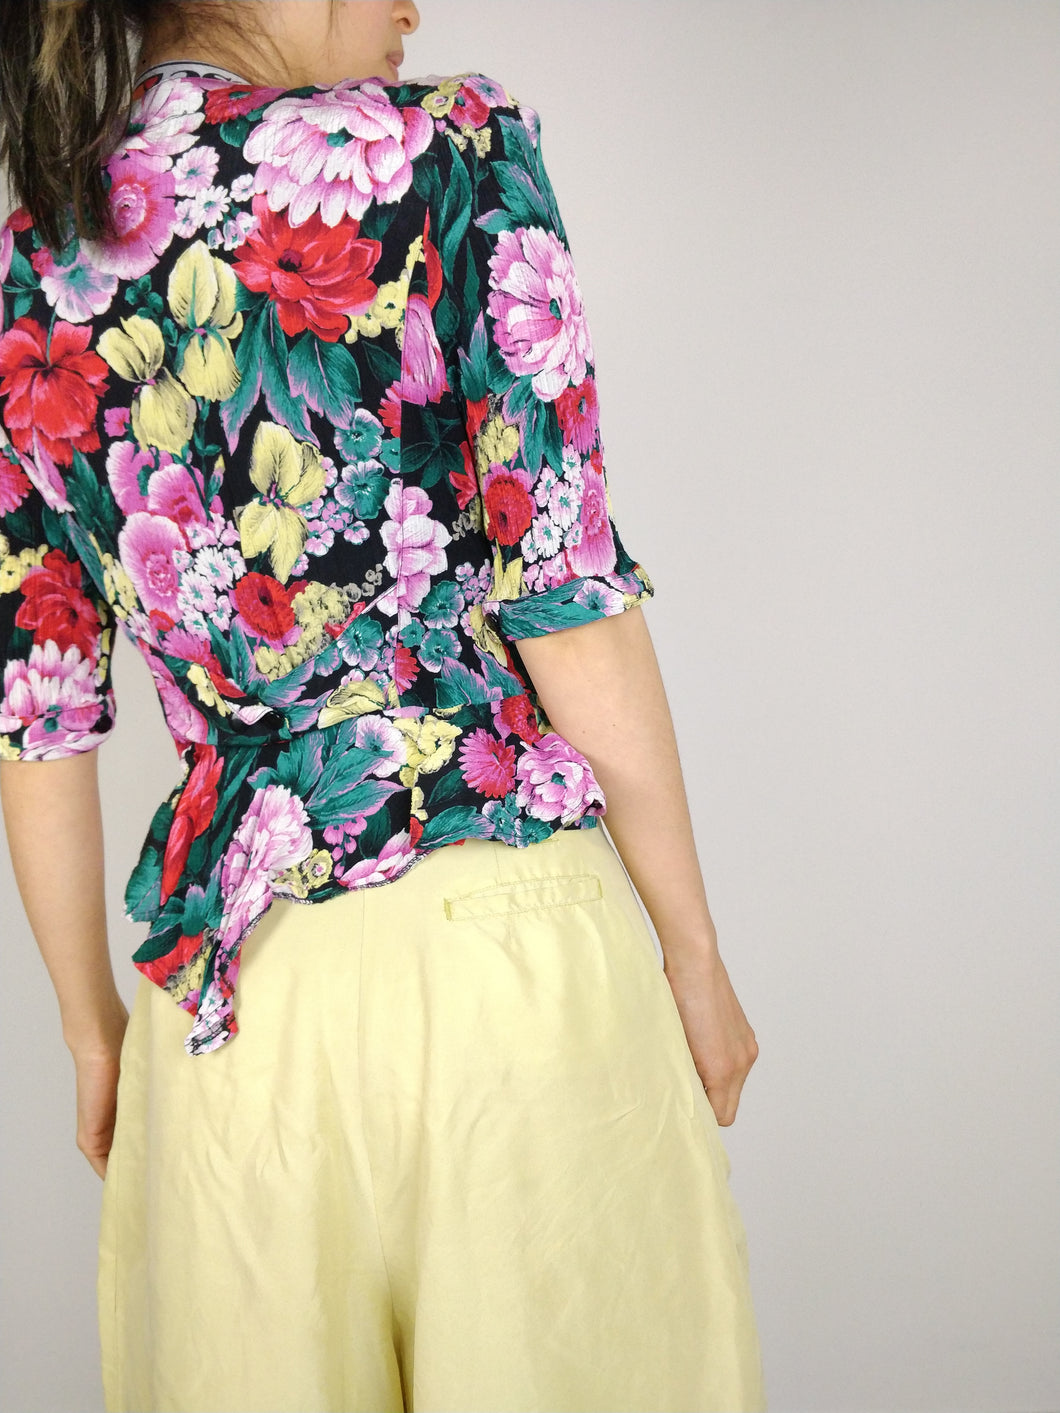 The Botanical Garden | Vintage floral flower pattern red pink yellow short sleeve crinkle blouse Yessica XS-S